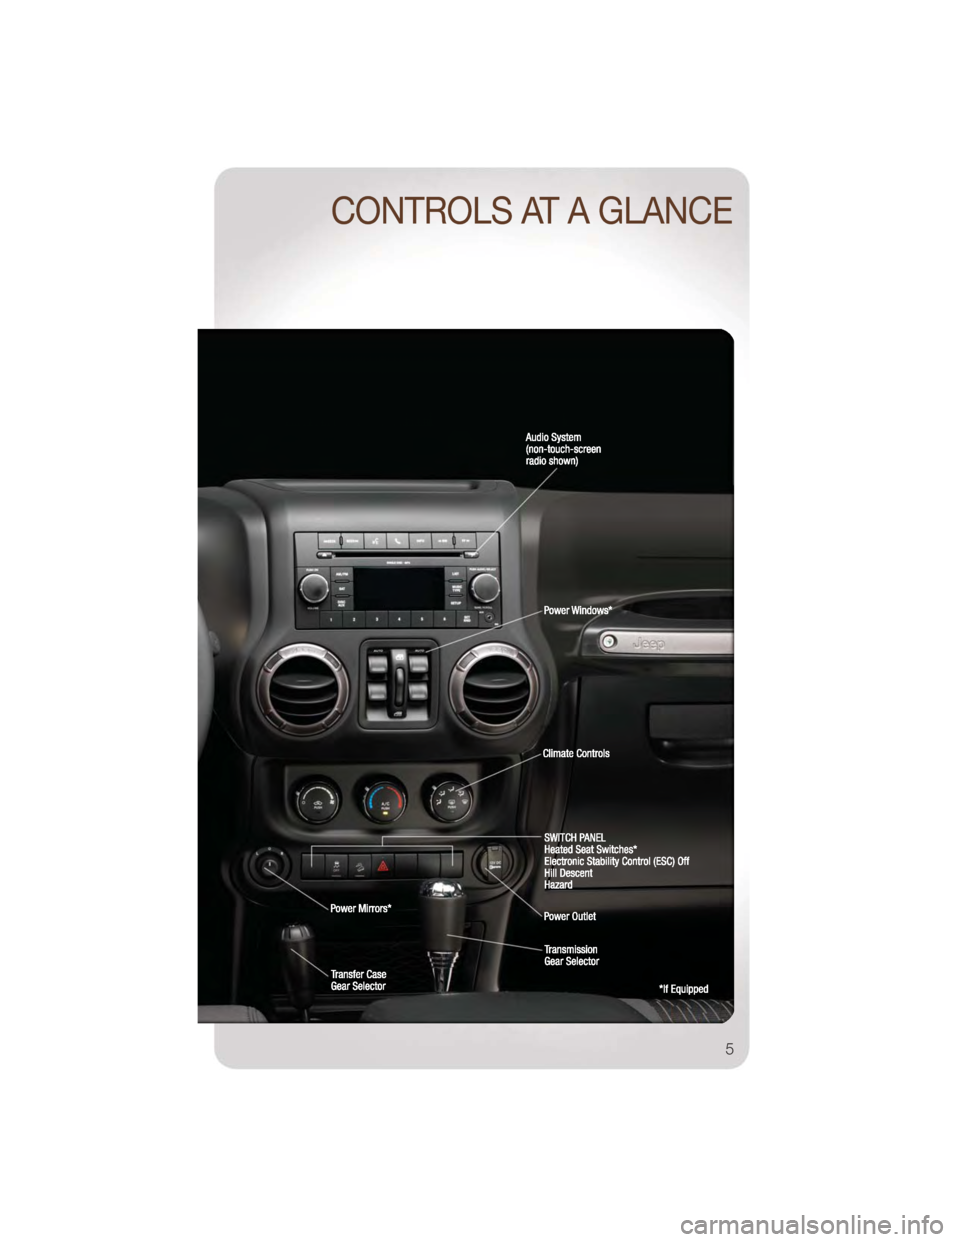 JEEP WRANGLER 2011 JK / 3.G User Guide CONTROLS AT A GLANCE
5 